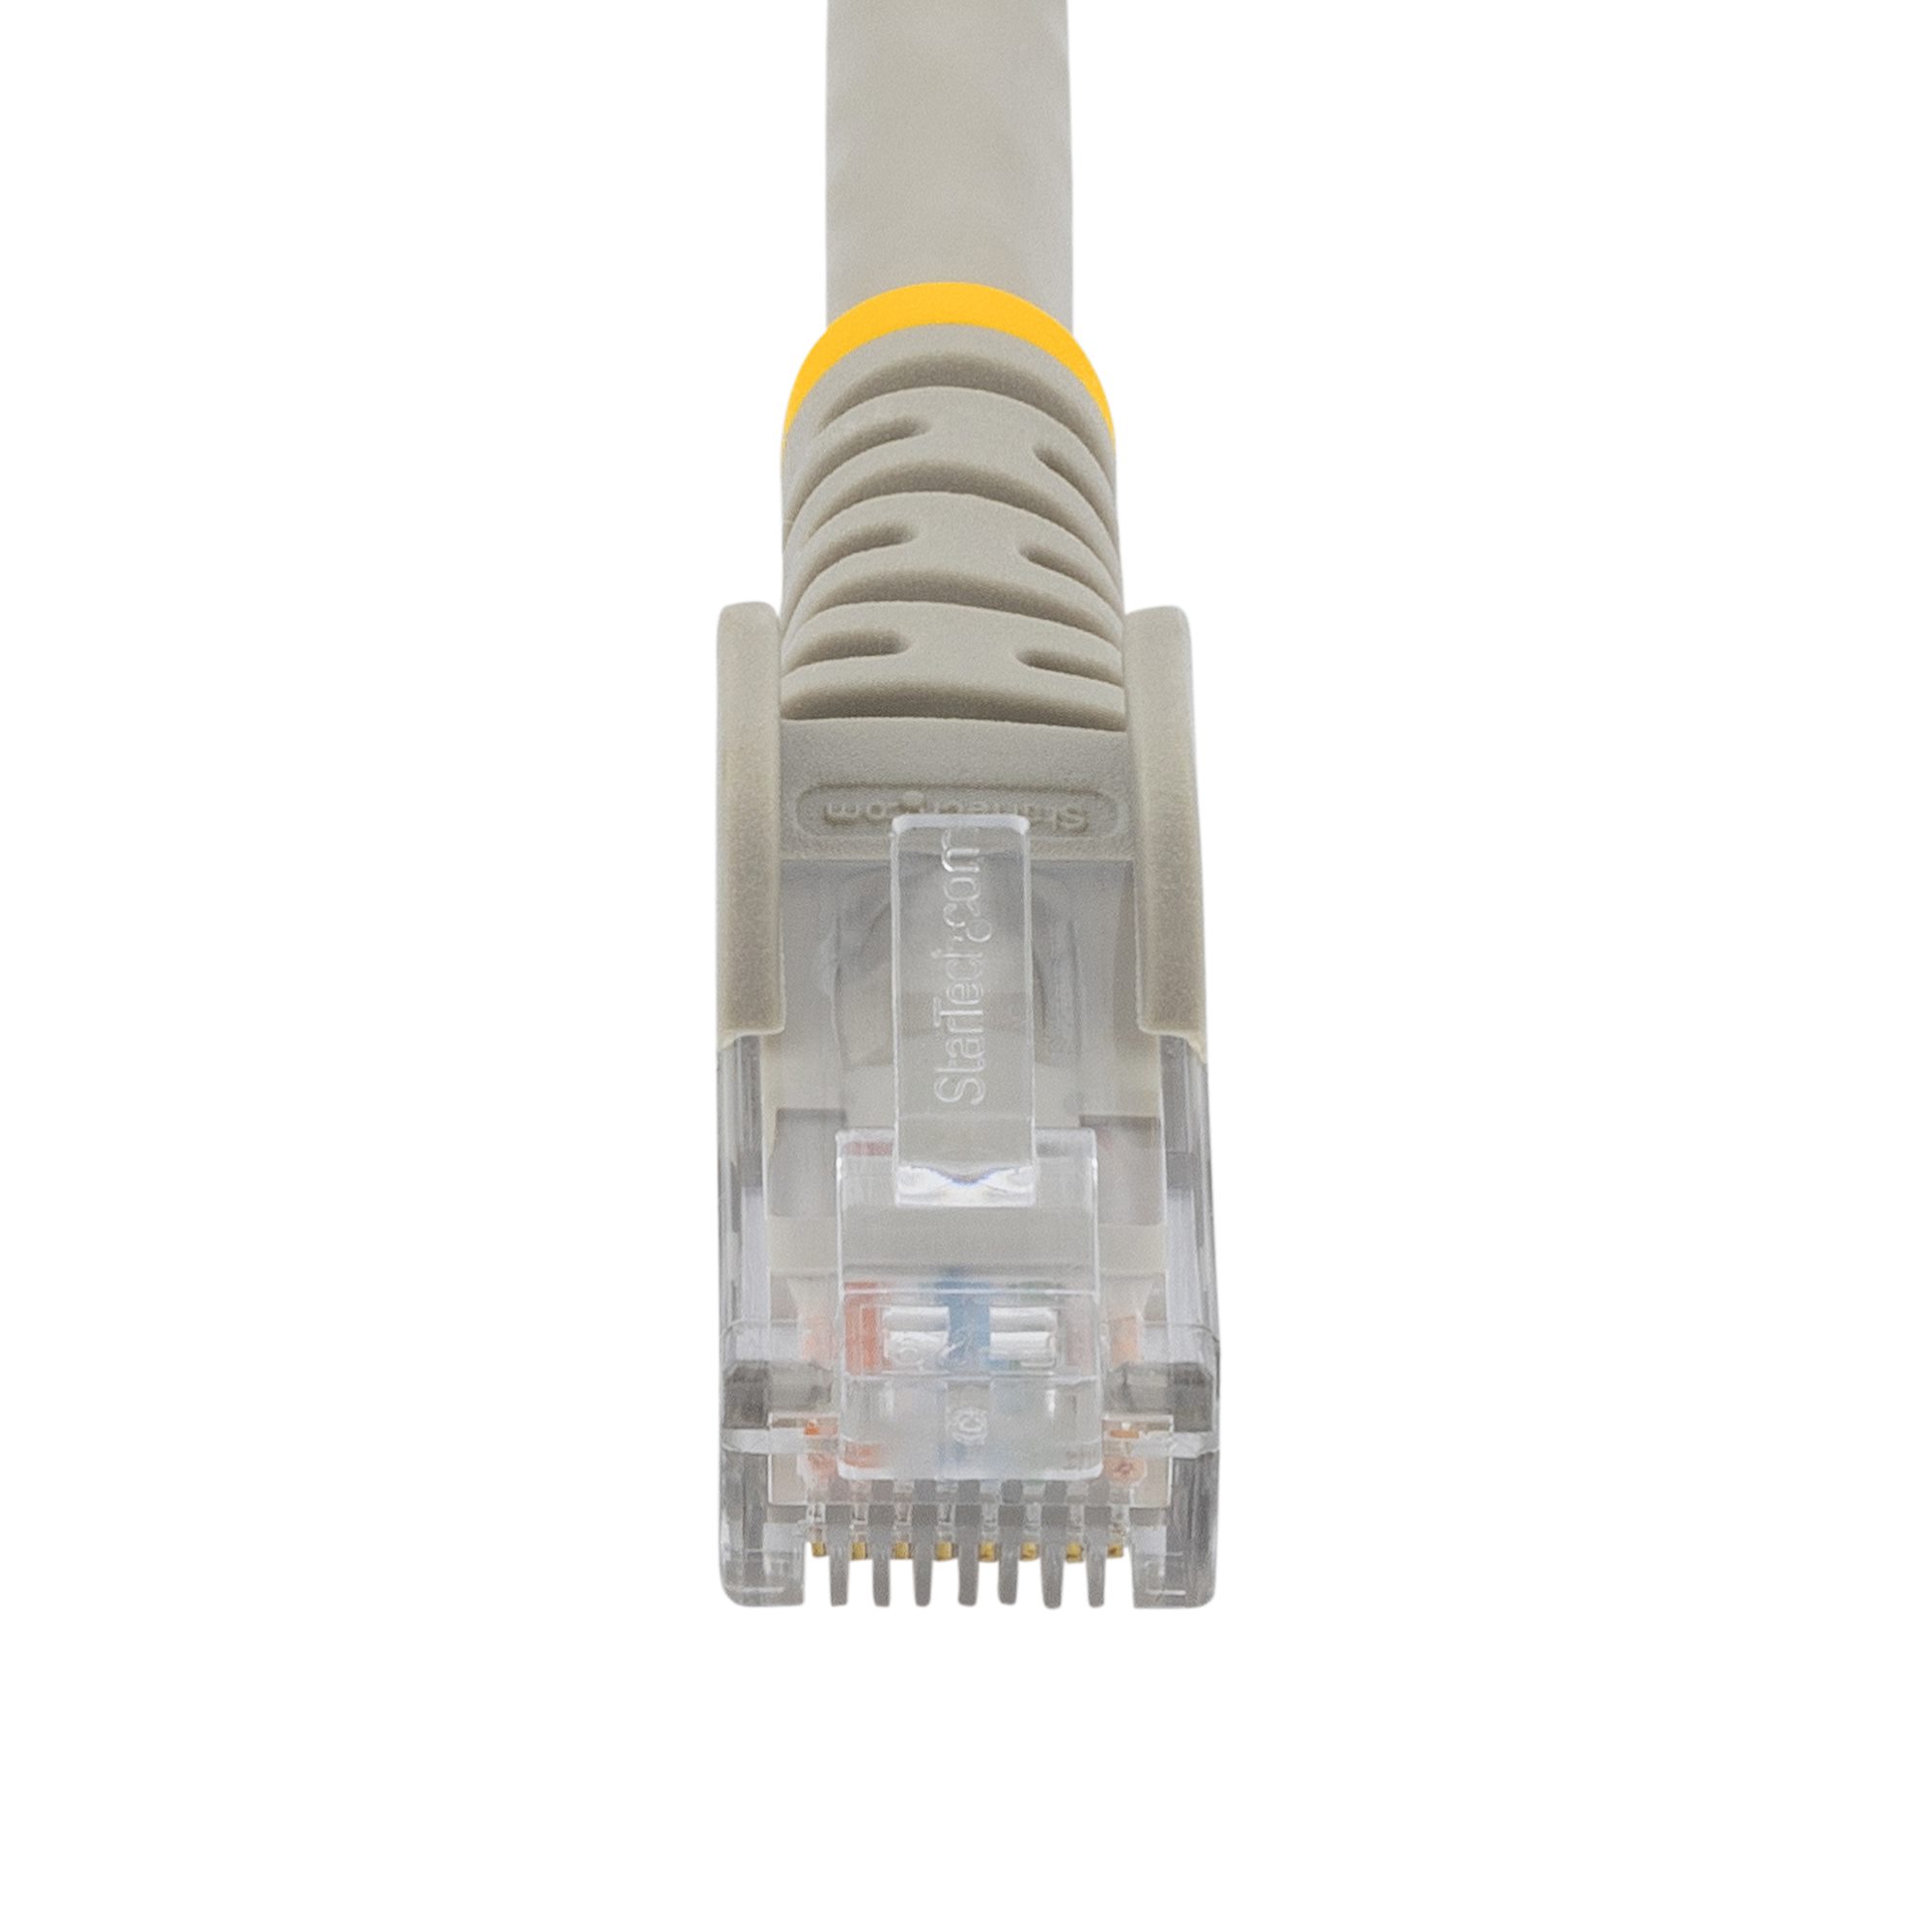 Technotech Cat6 Ethernet Lan Cable 5 Meter | High Speed 10Gbps | Bandwidth  550Mhz | Gold-Plated RJ45, Patch Cable, Lan Cable, Network Cable, Internet